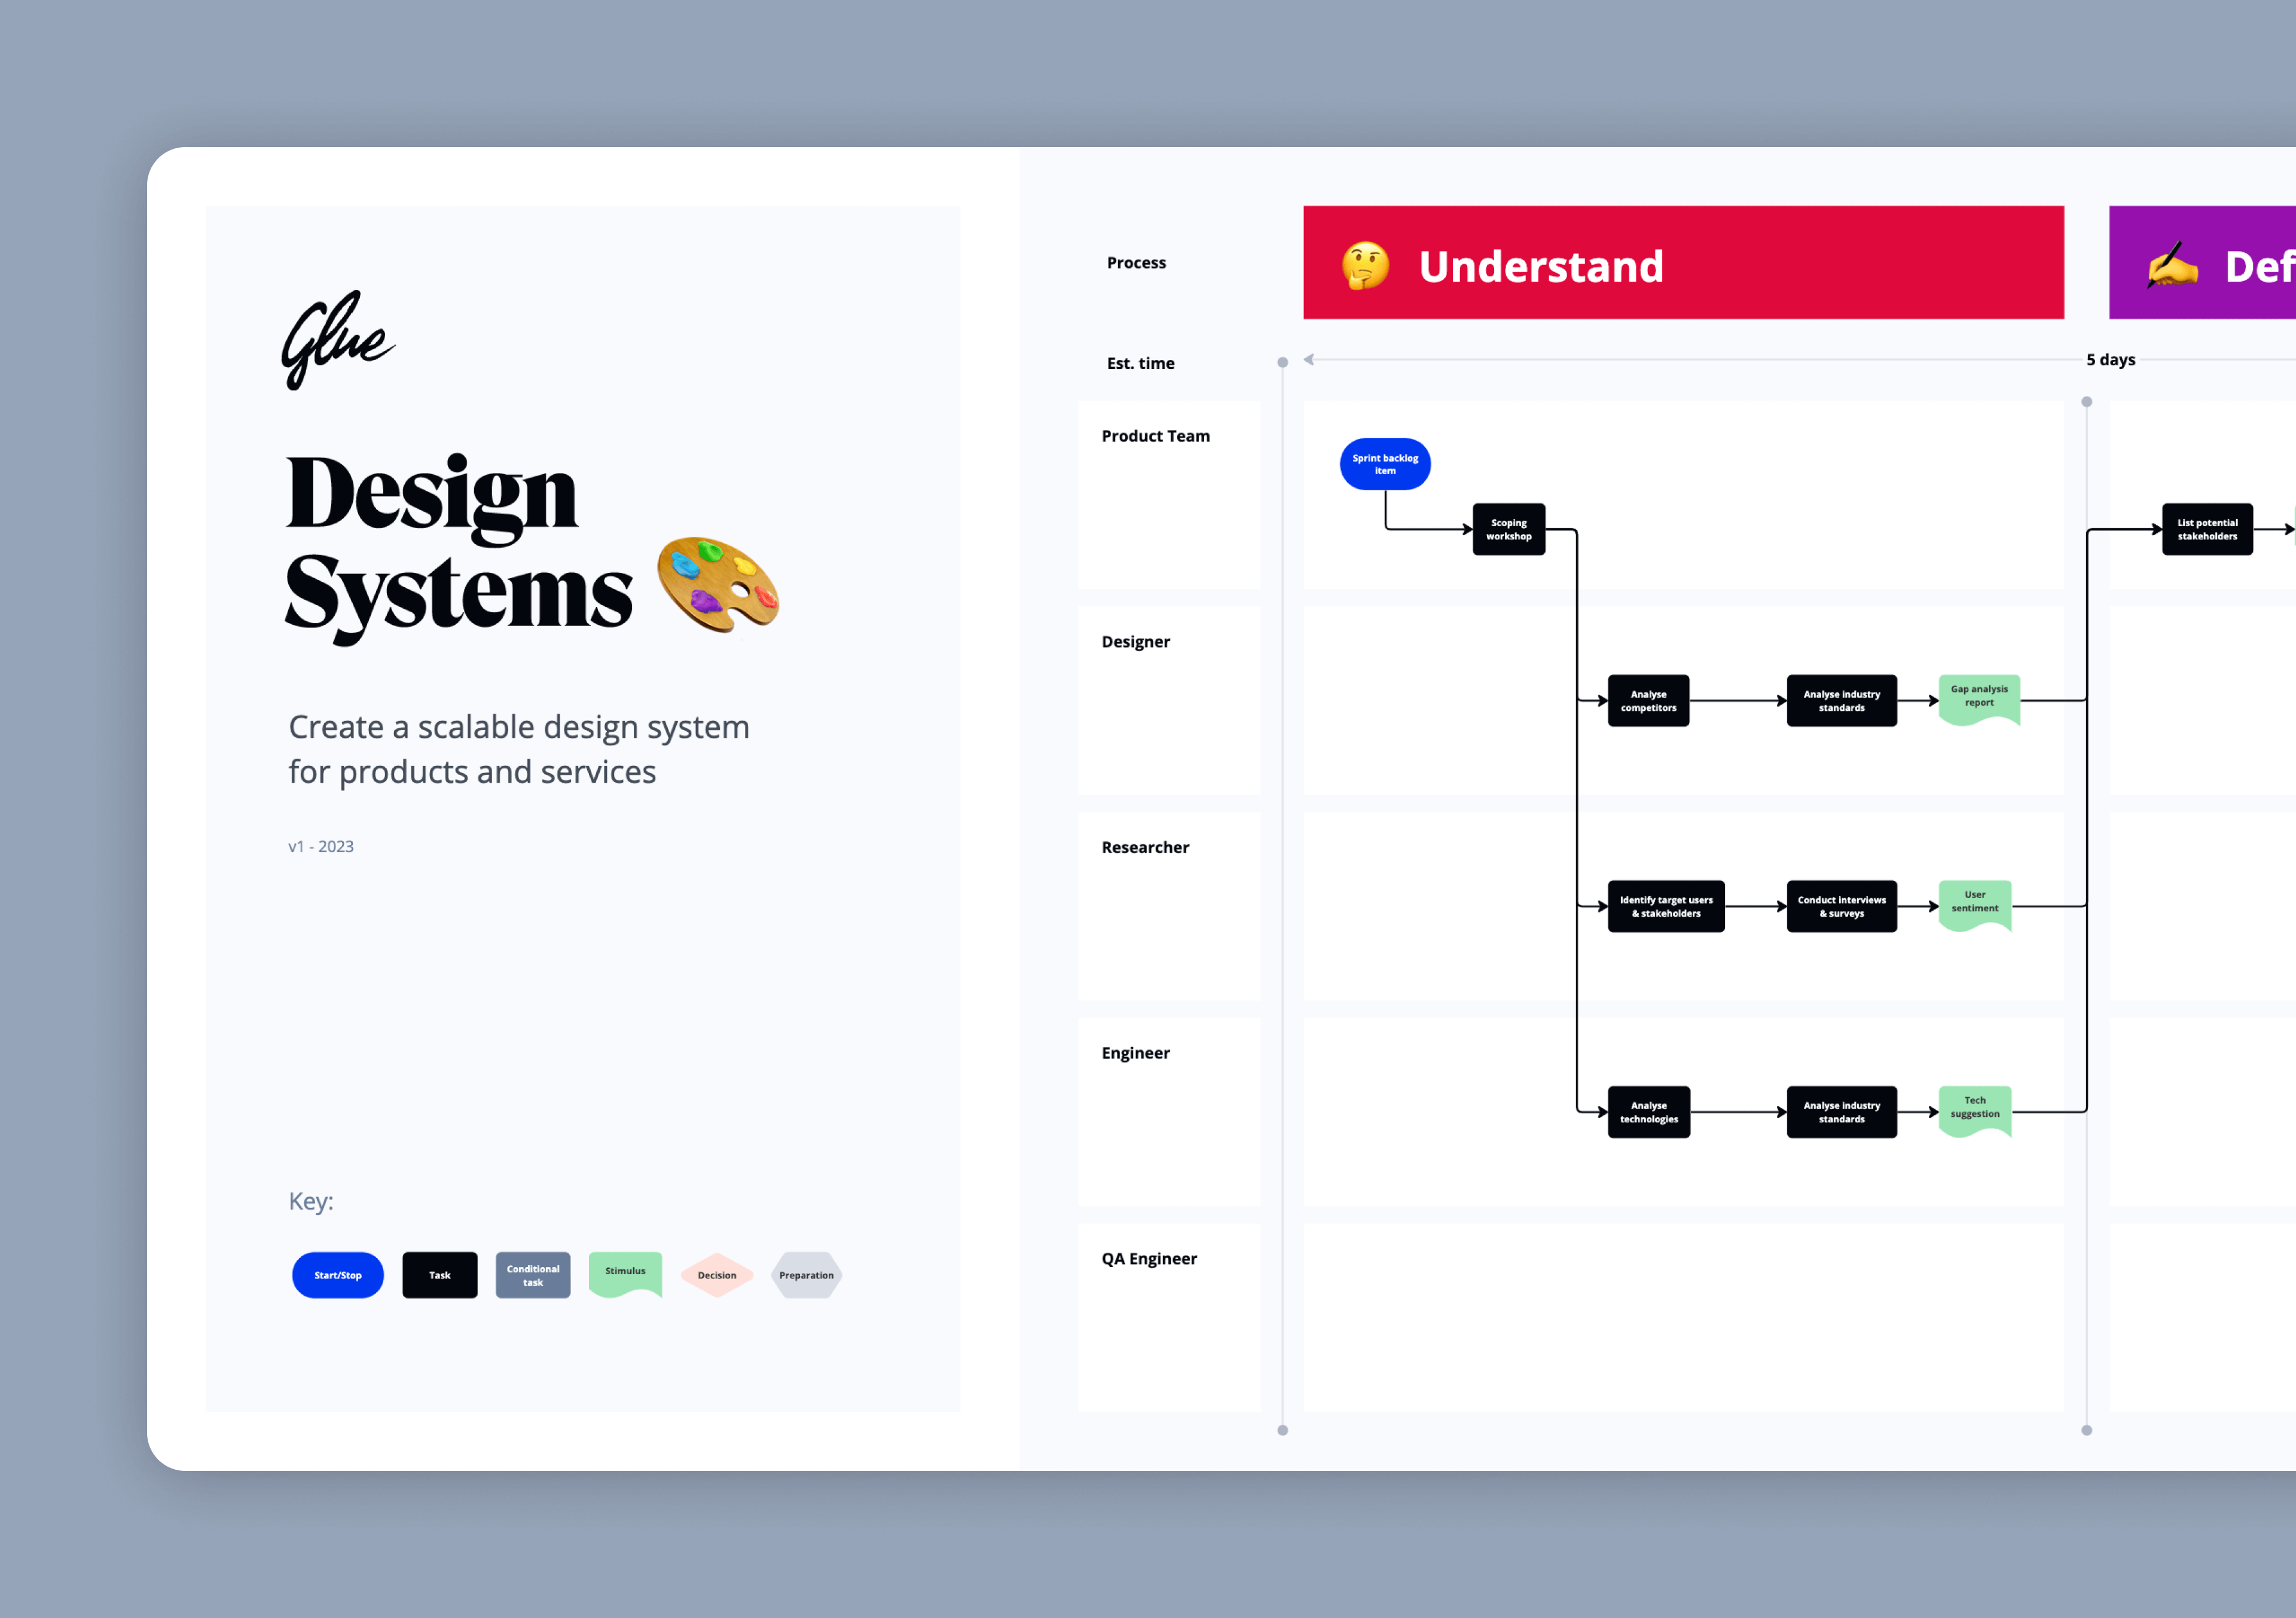 Visualisation of the Glue Product Design Design System framework workflow followed by the Glue design, strategy and research team to deliver high-end client projects